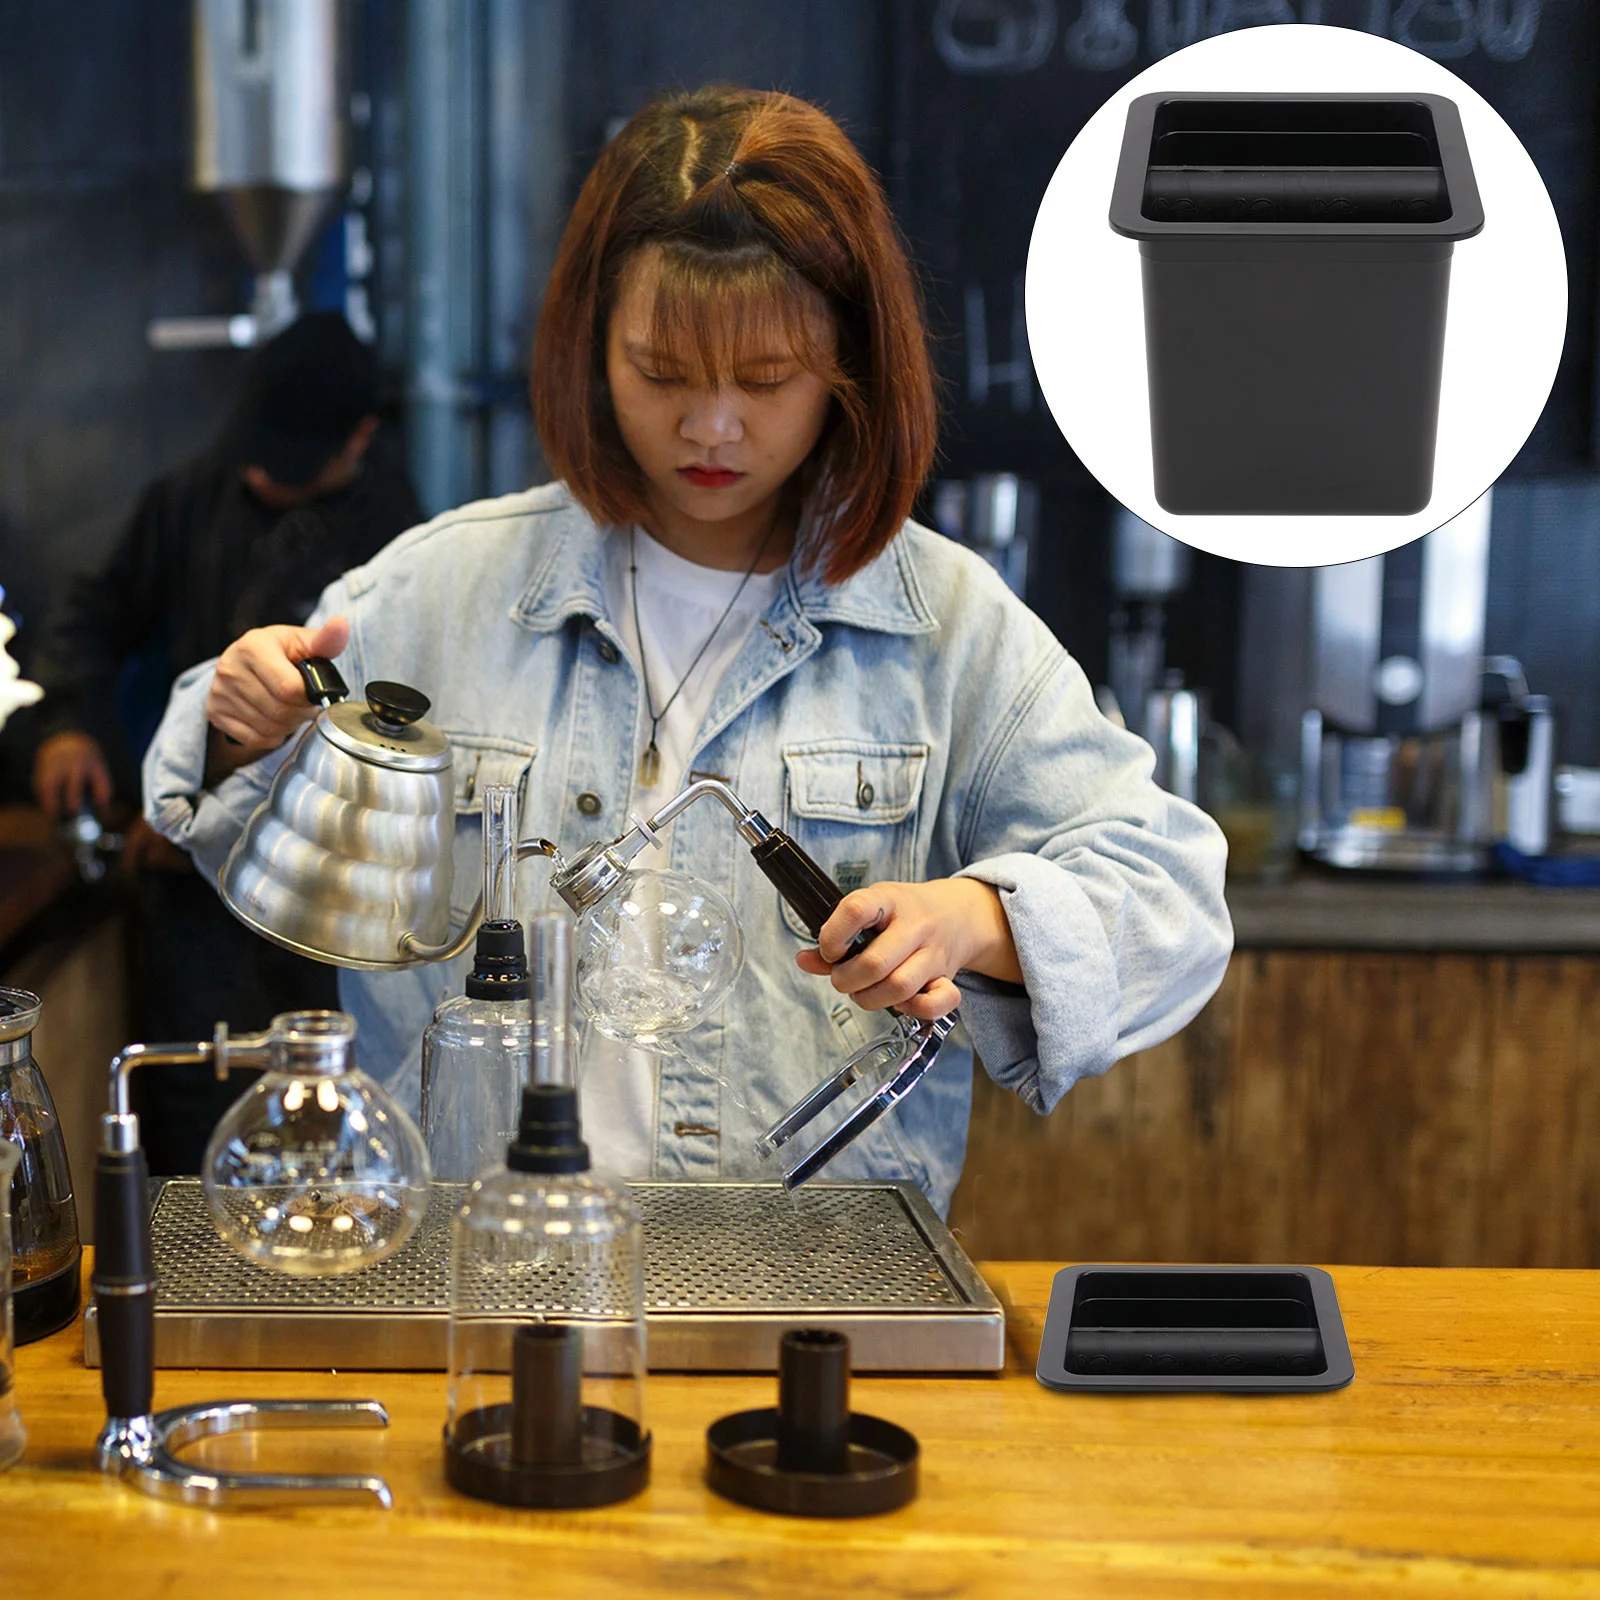 

Coffee Knock Box Bin Espresso Waste Dump Grind Machine Grounds Bucket Container Tamper Mini Residue Style Barista Large Handle